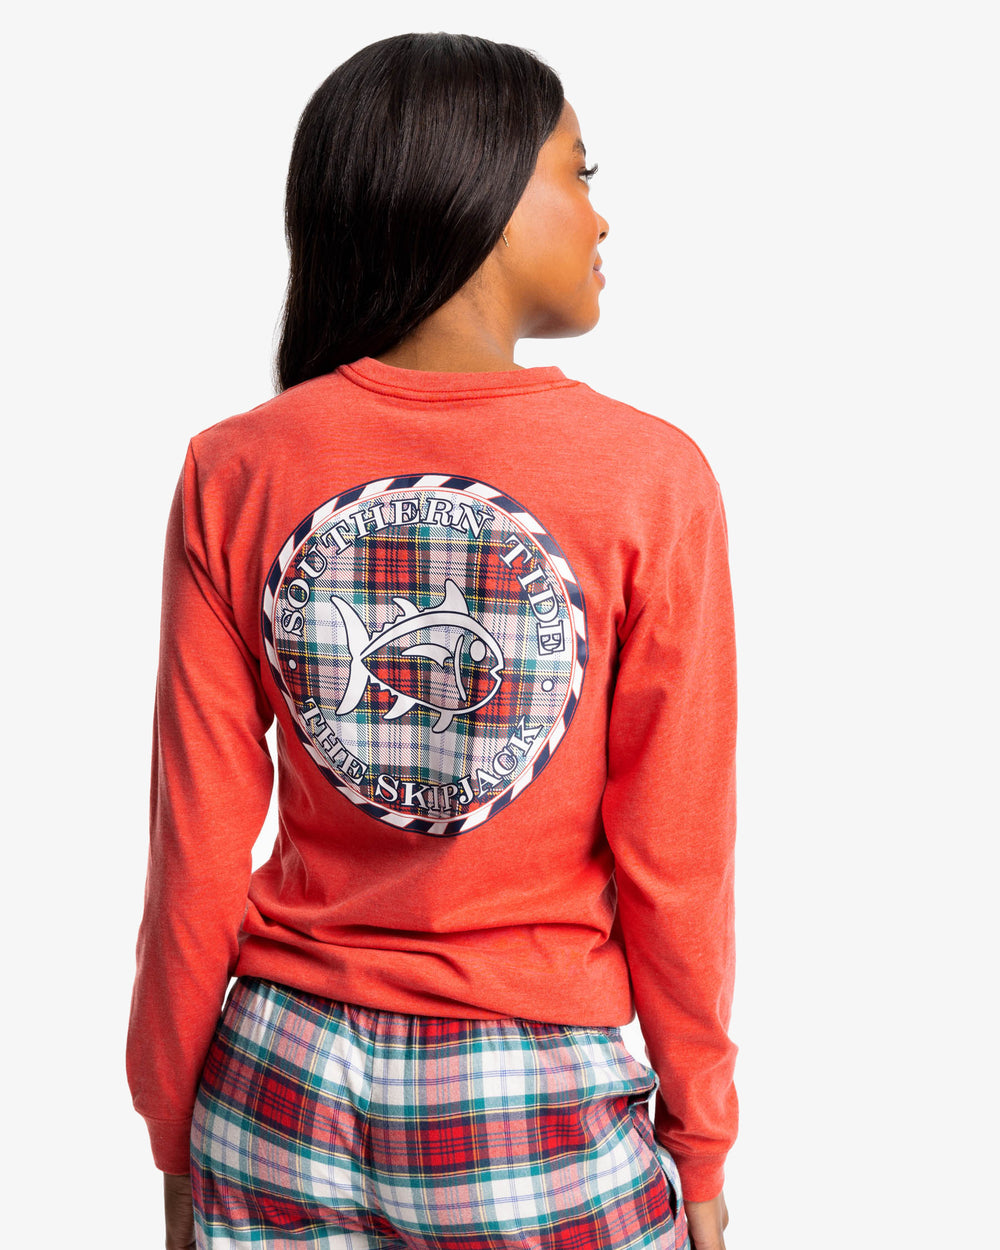 The back view of the Southern Tide Women's Heather Plaid Skipjack Medallion Long Sleeve T-Shirt by Southern Tide - Heather Charleston Red